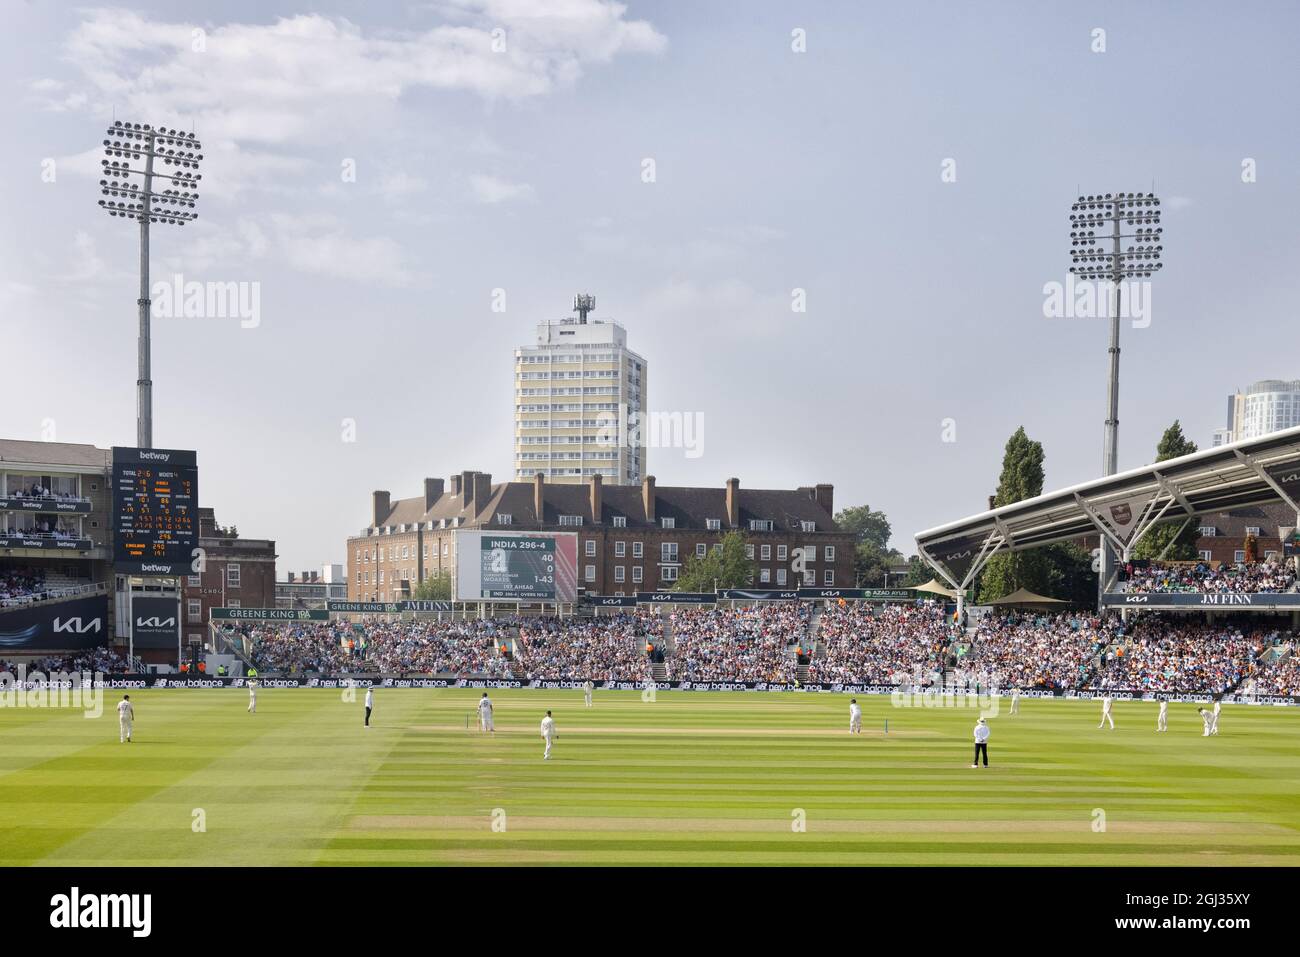 England cricket; The Oval Cricket Ground, or Kia Oval, July 2021, England v India test match, watched by crowds of fans in summer, The Oval, London UK Stock Photo